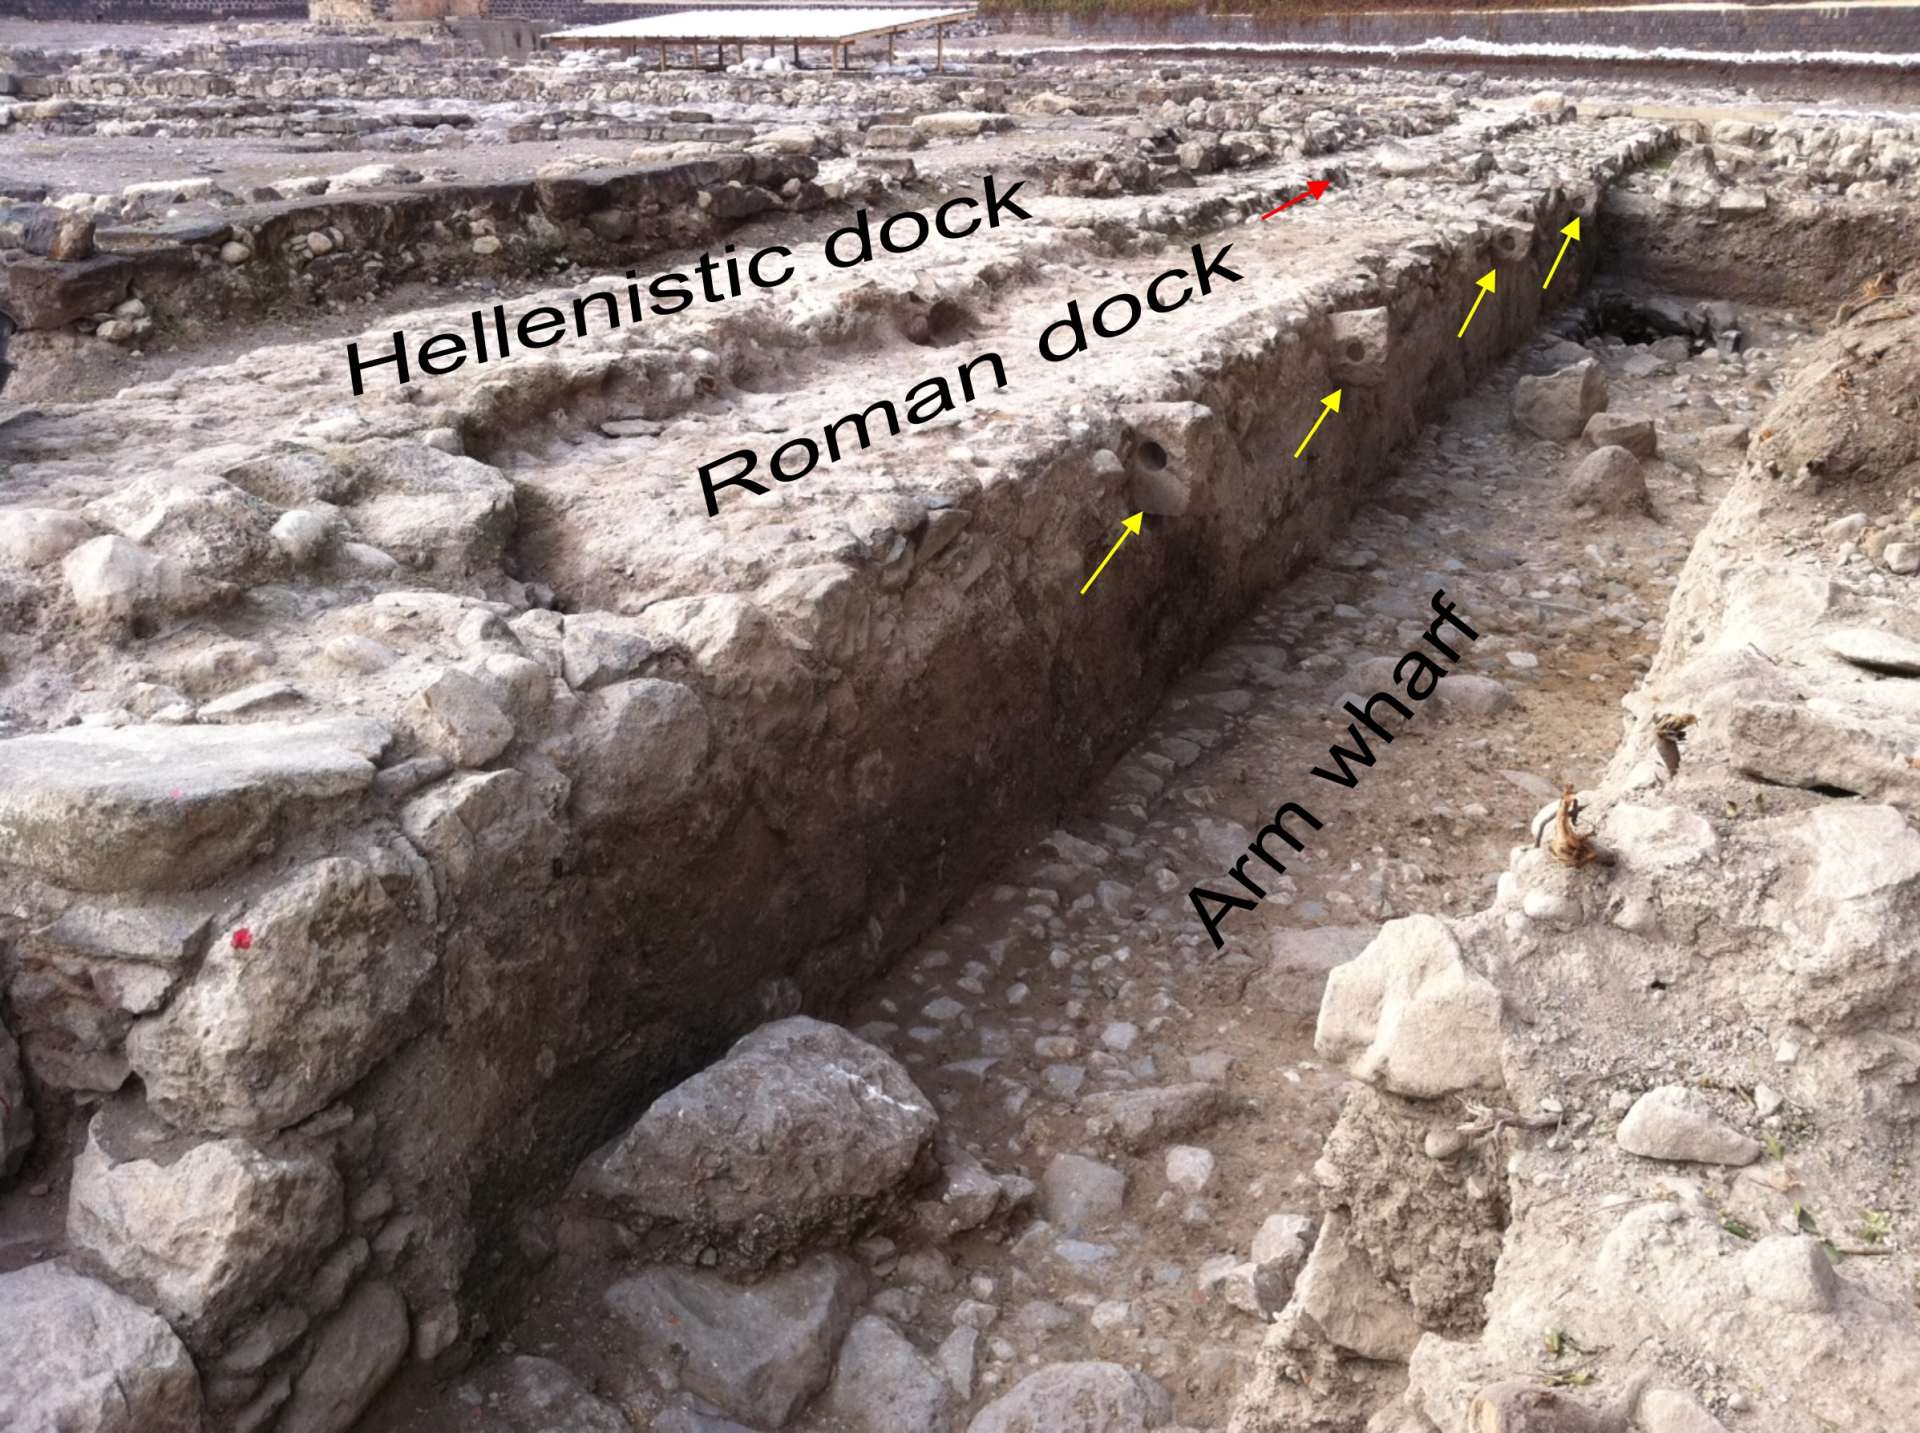 Magdala_Harbour_structures